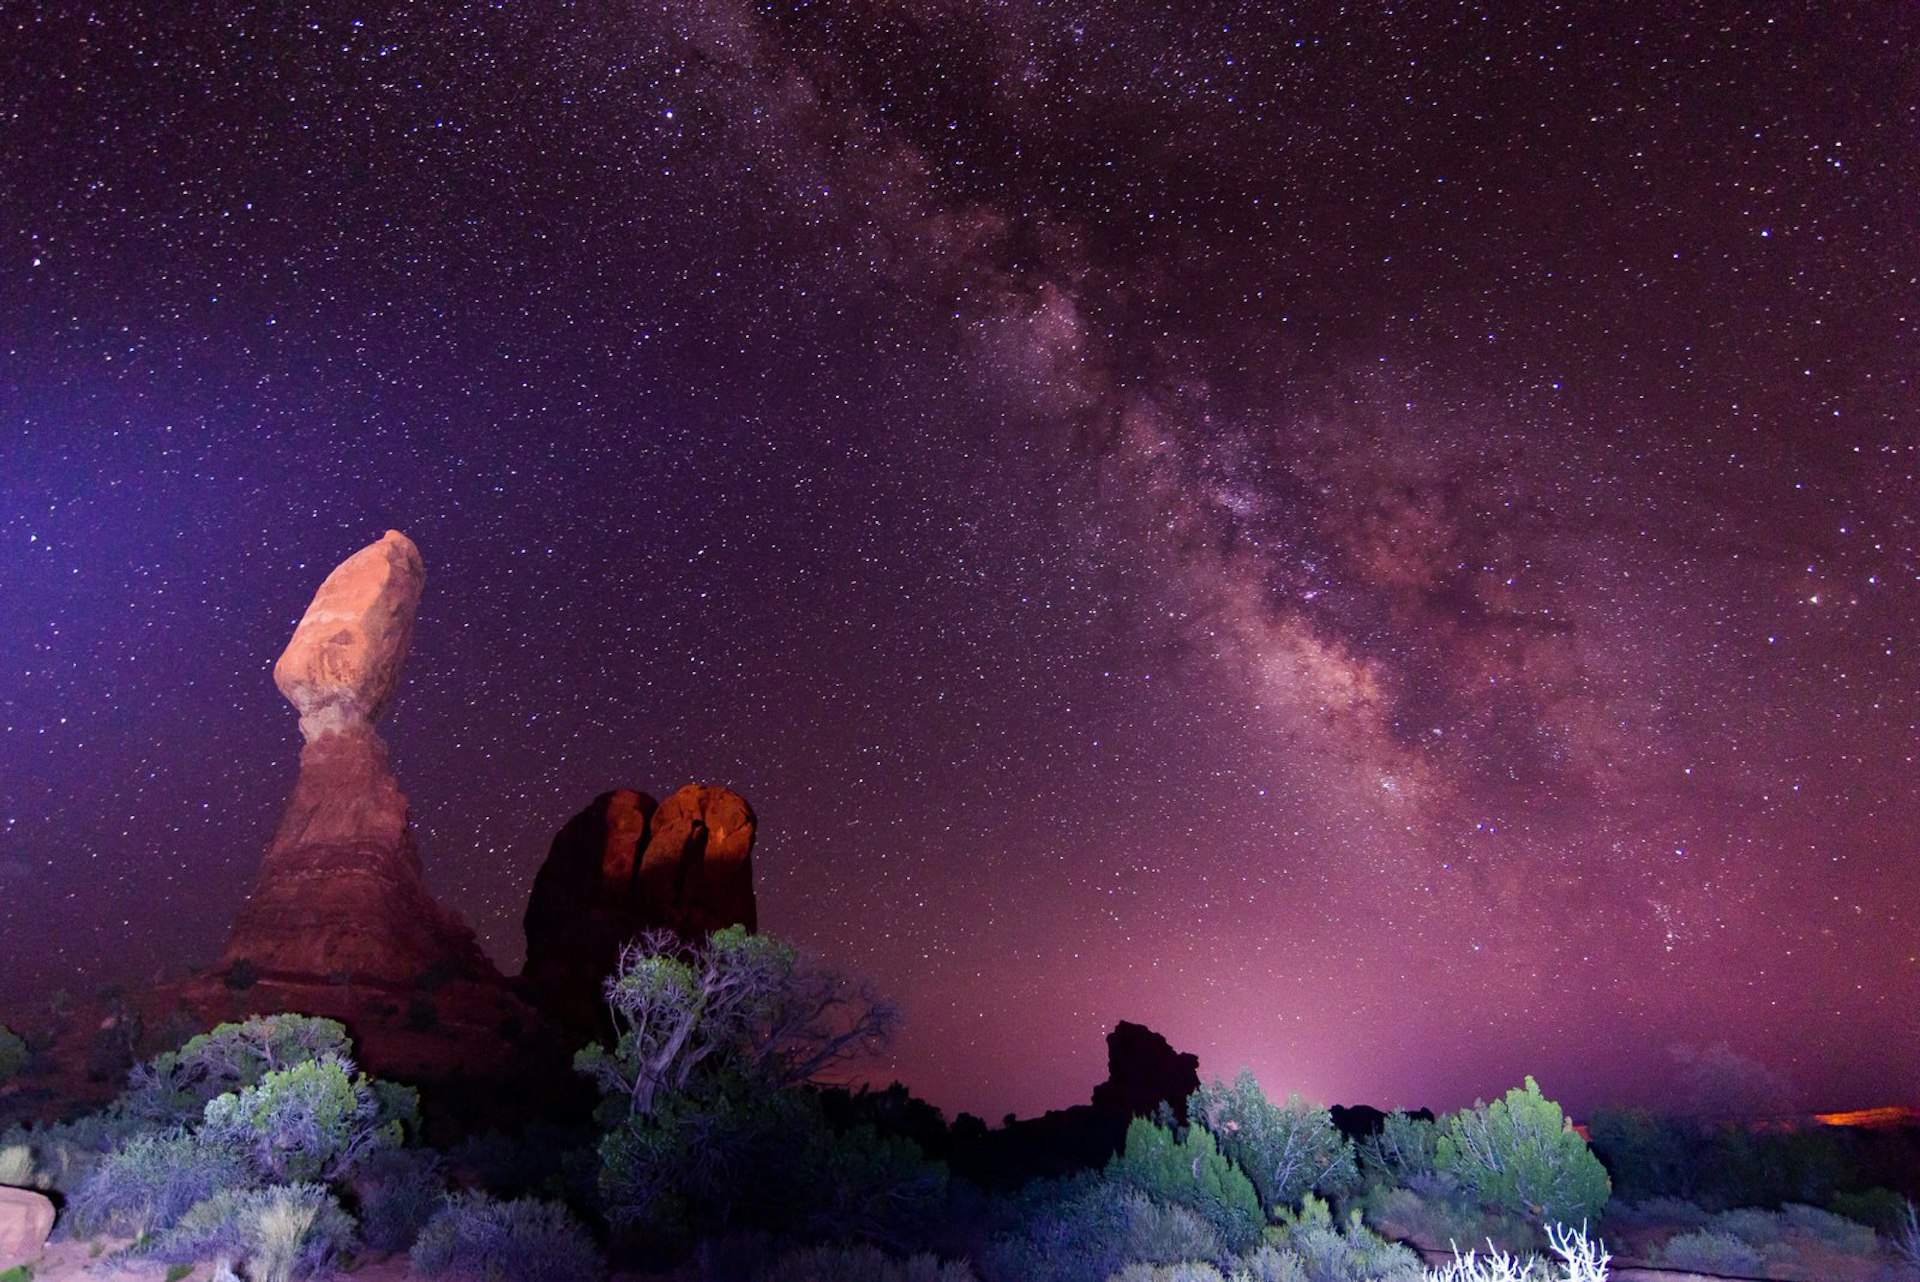 The Milky Way appears in the purple night sky above a rock formation in Utah